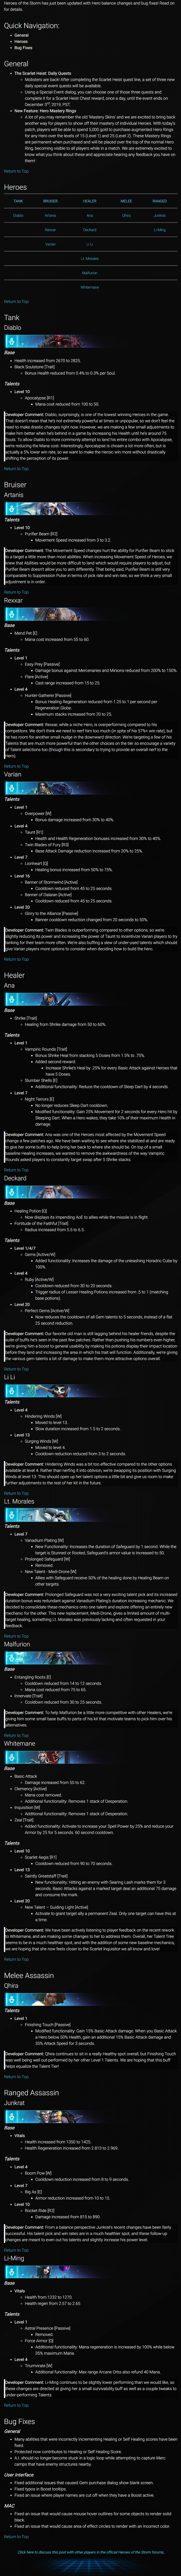 screencapture-blizztrack-patch-notes-heroes-of-the-storm-latest-2019-10-16-08_29_51.png